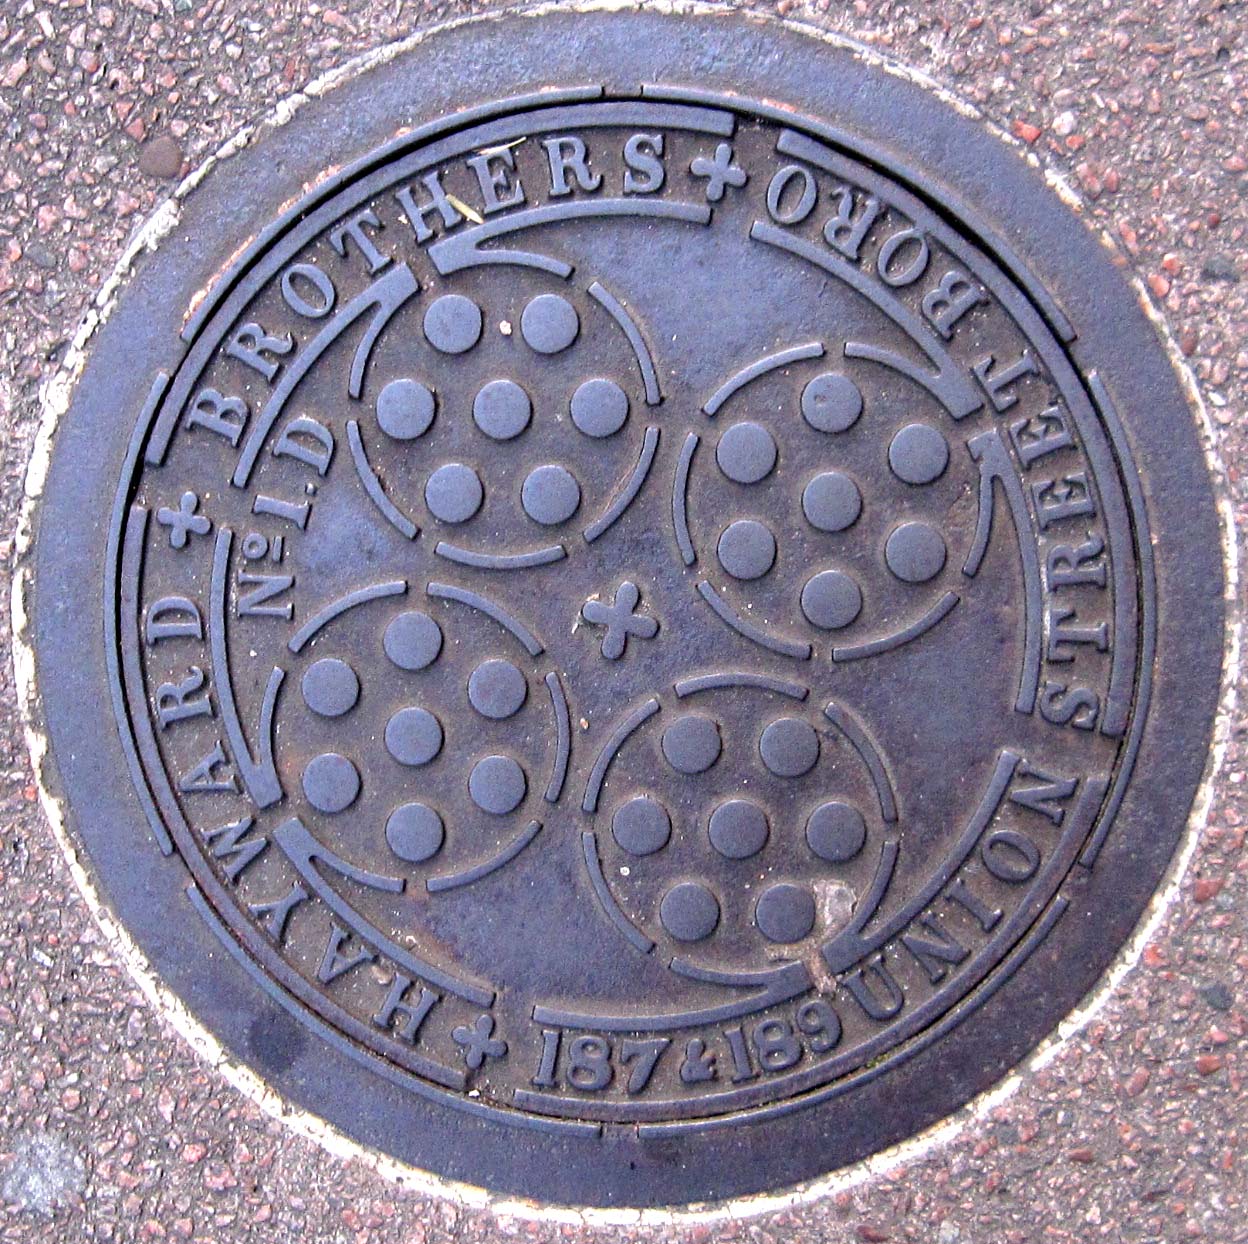 Brothers manhole cover